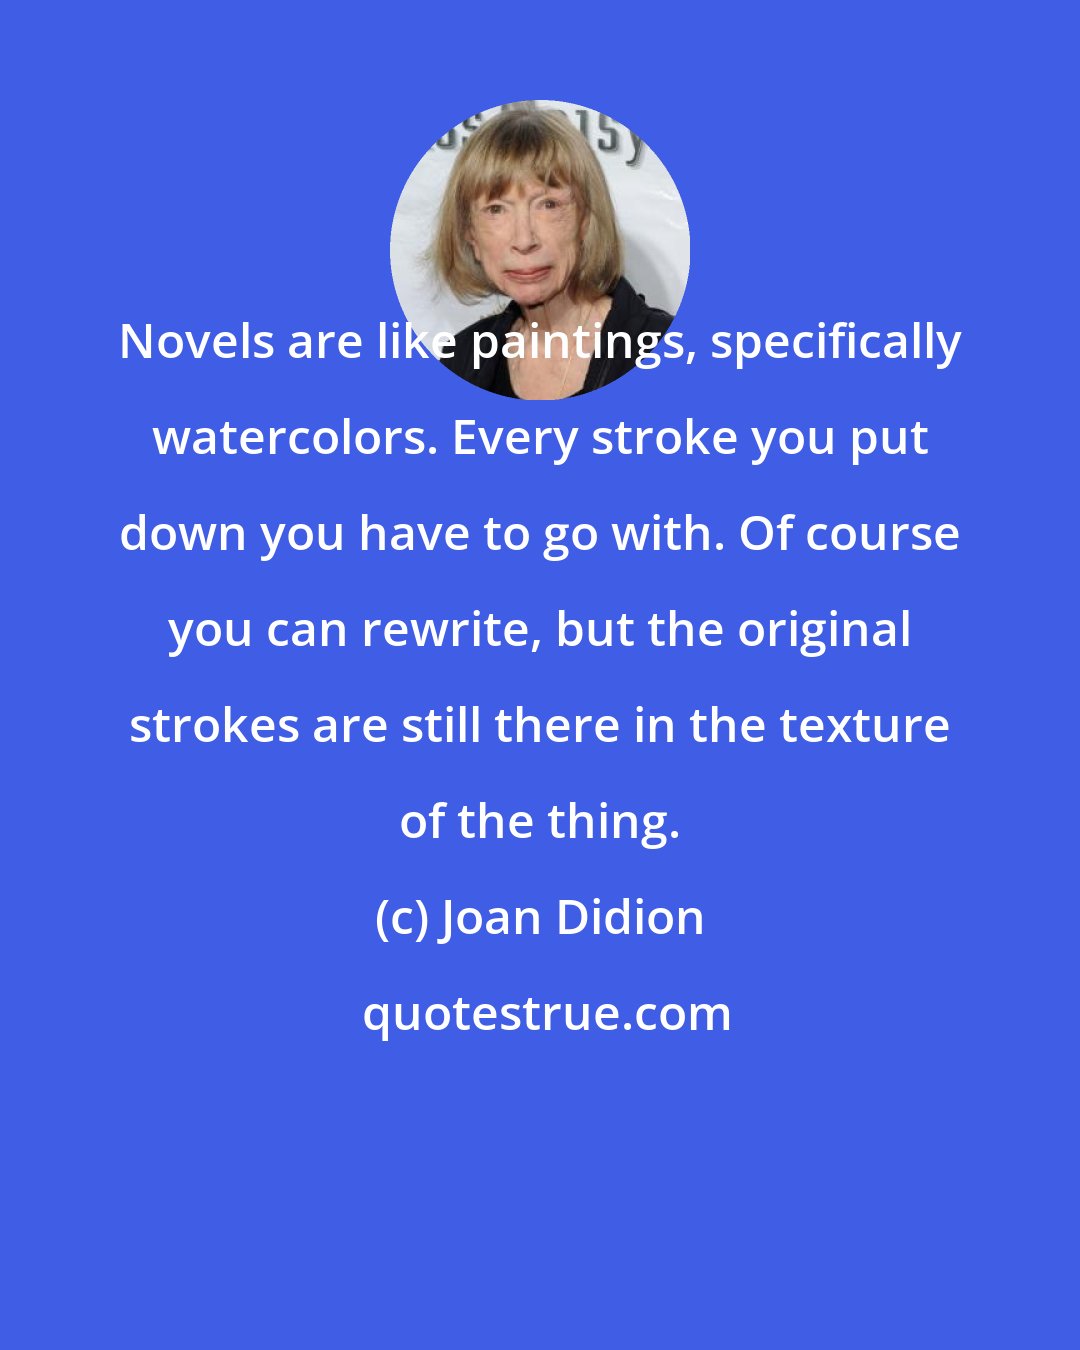 Joan Didion: Novels are like paintings, specifically watercolors. Every stroke you put down you have to go with. Of course you can rewrite, but the original strokes are still there in the texture of the thing.